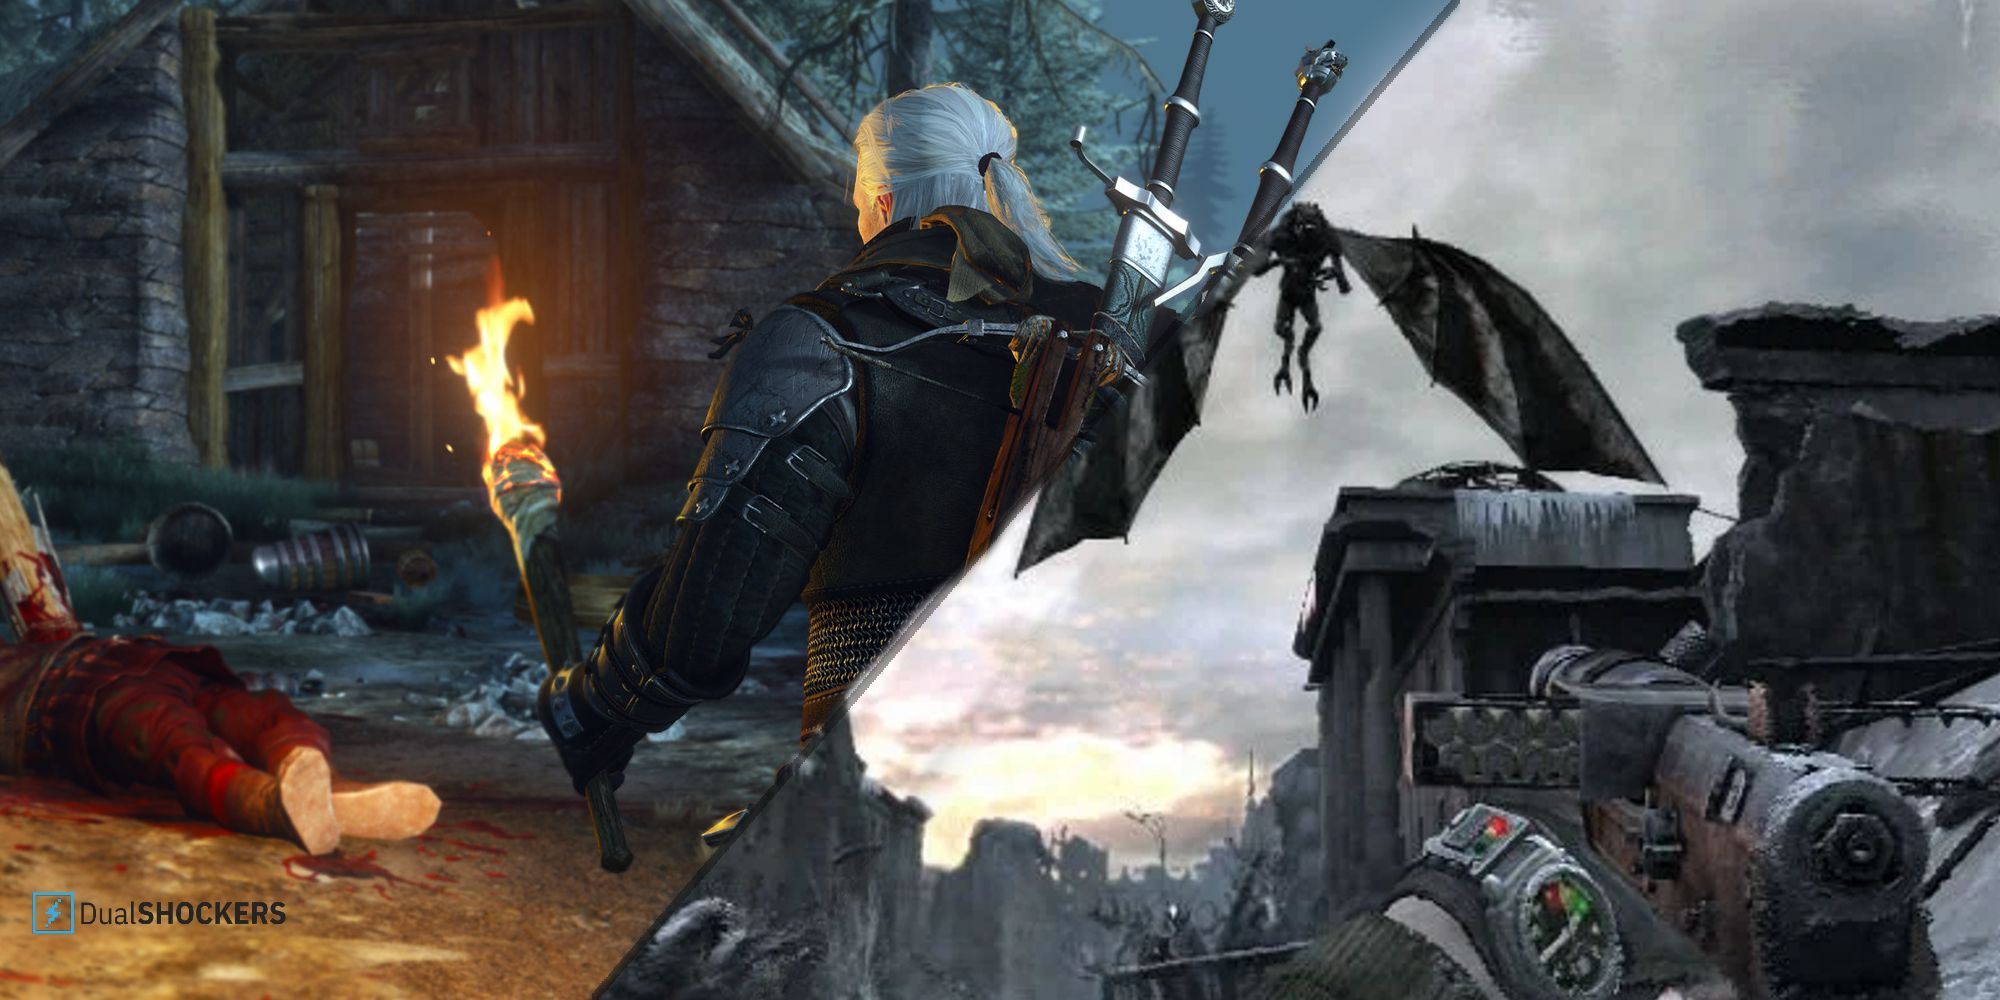 Split Image Left Side Geralt From Witcher Holding Torch Right Side Metro 2033 Holding Gun Pointing At Goblin